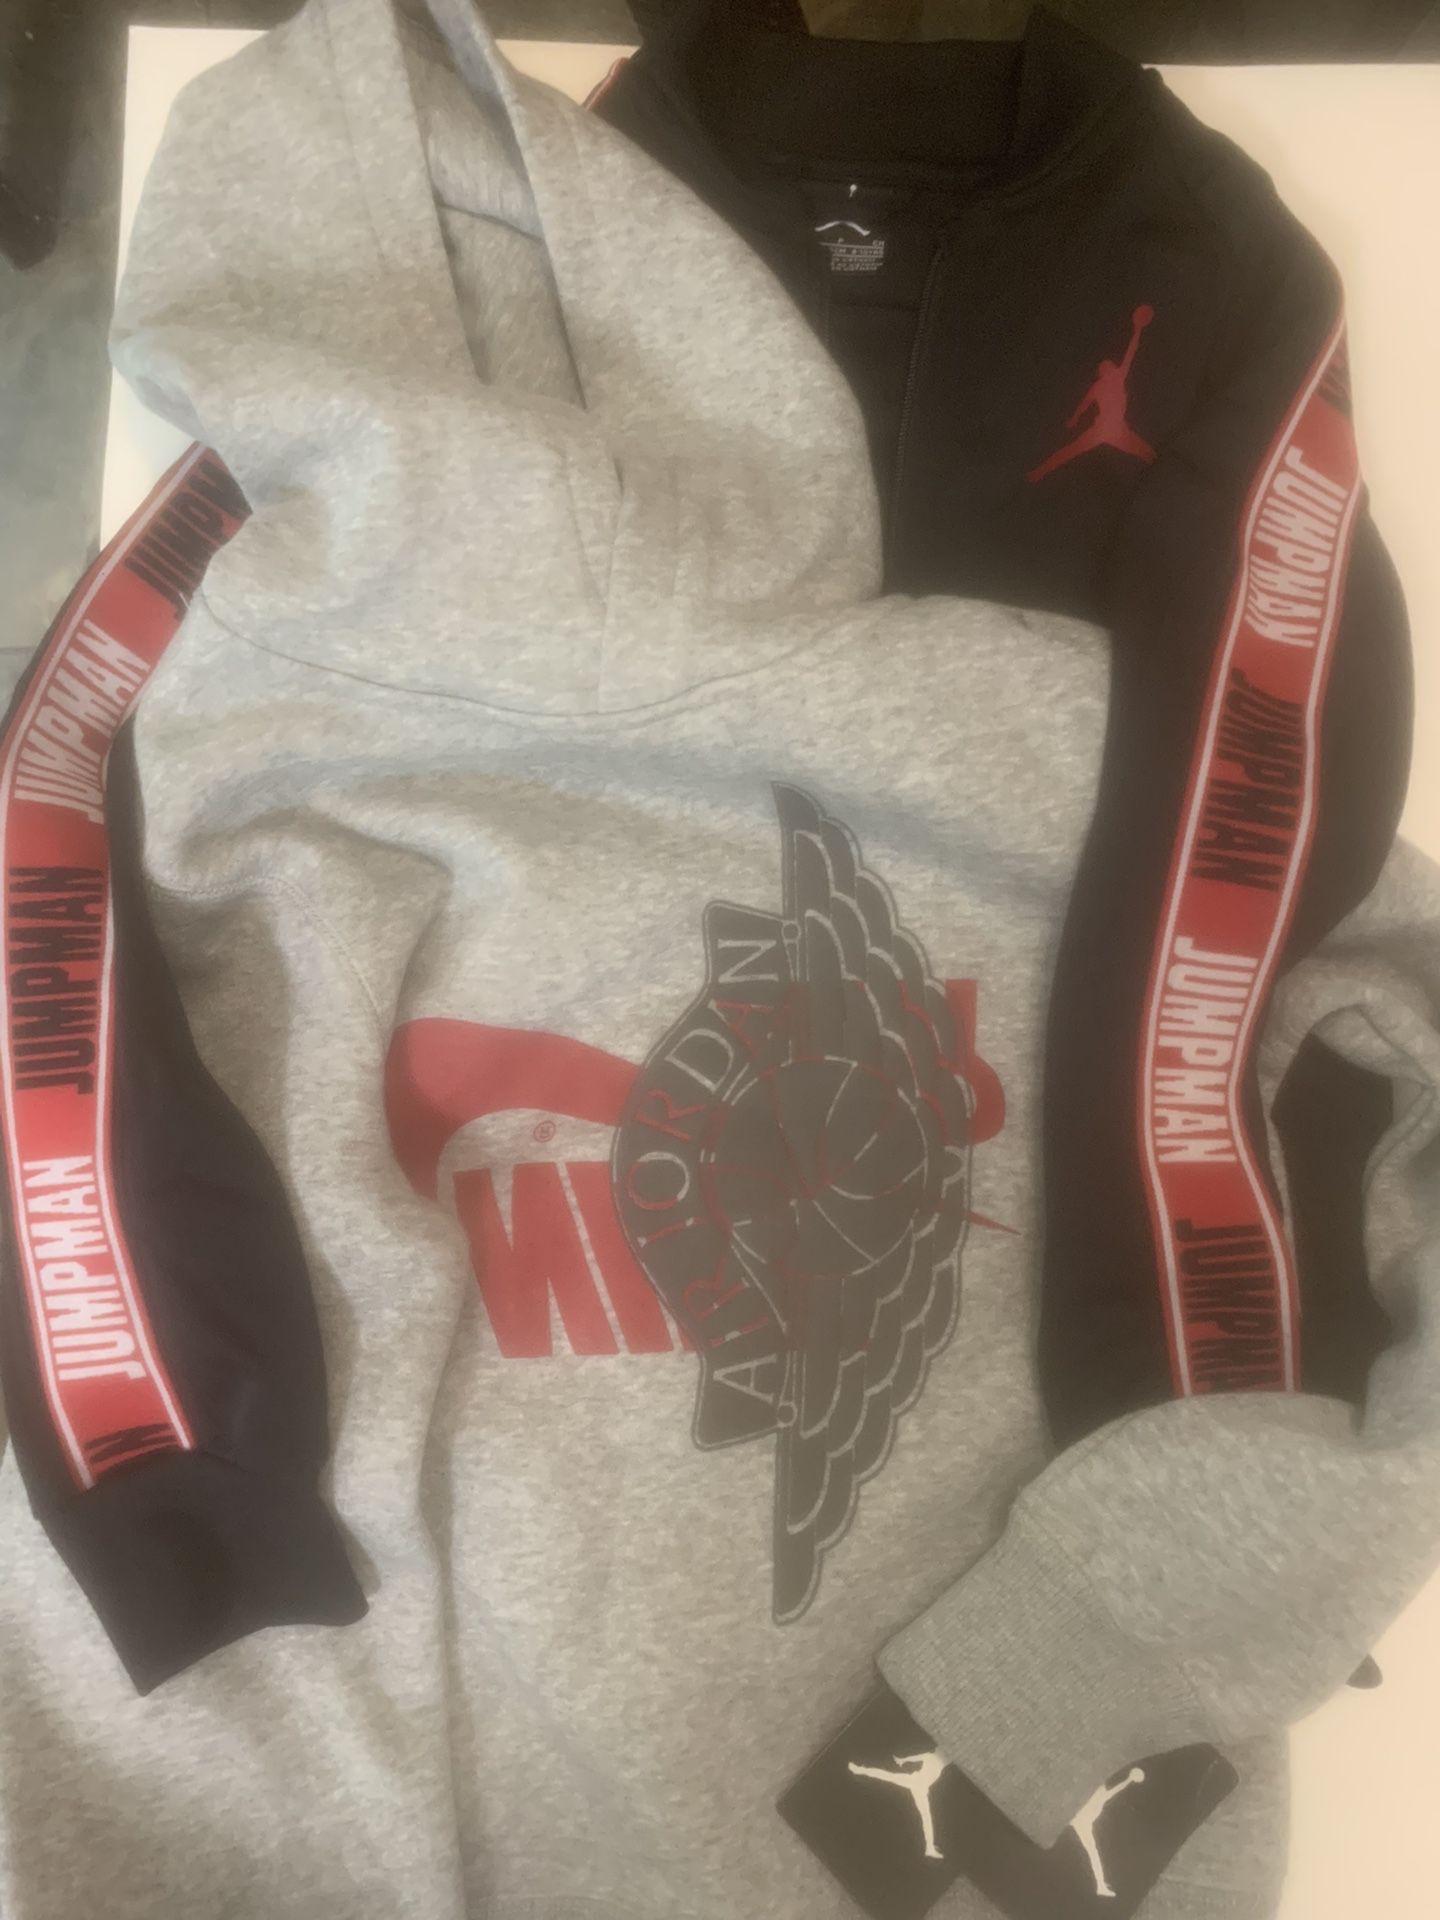 New Nike Air Jordan Hoodie And Track Jacket Both Size Kids Small  With Tags 